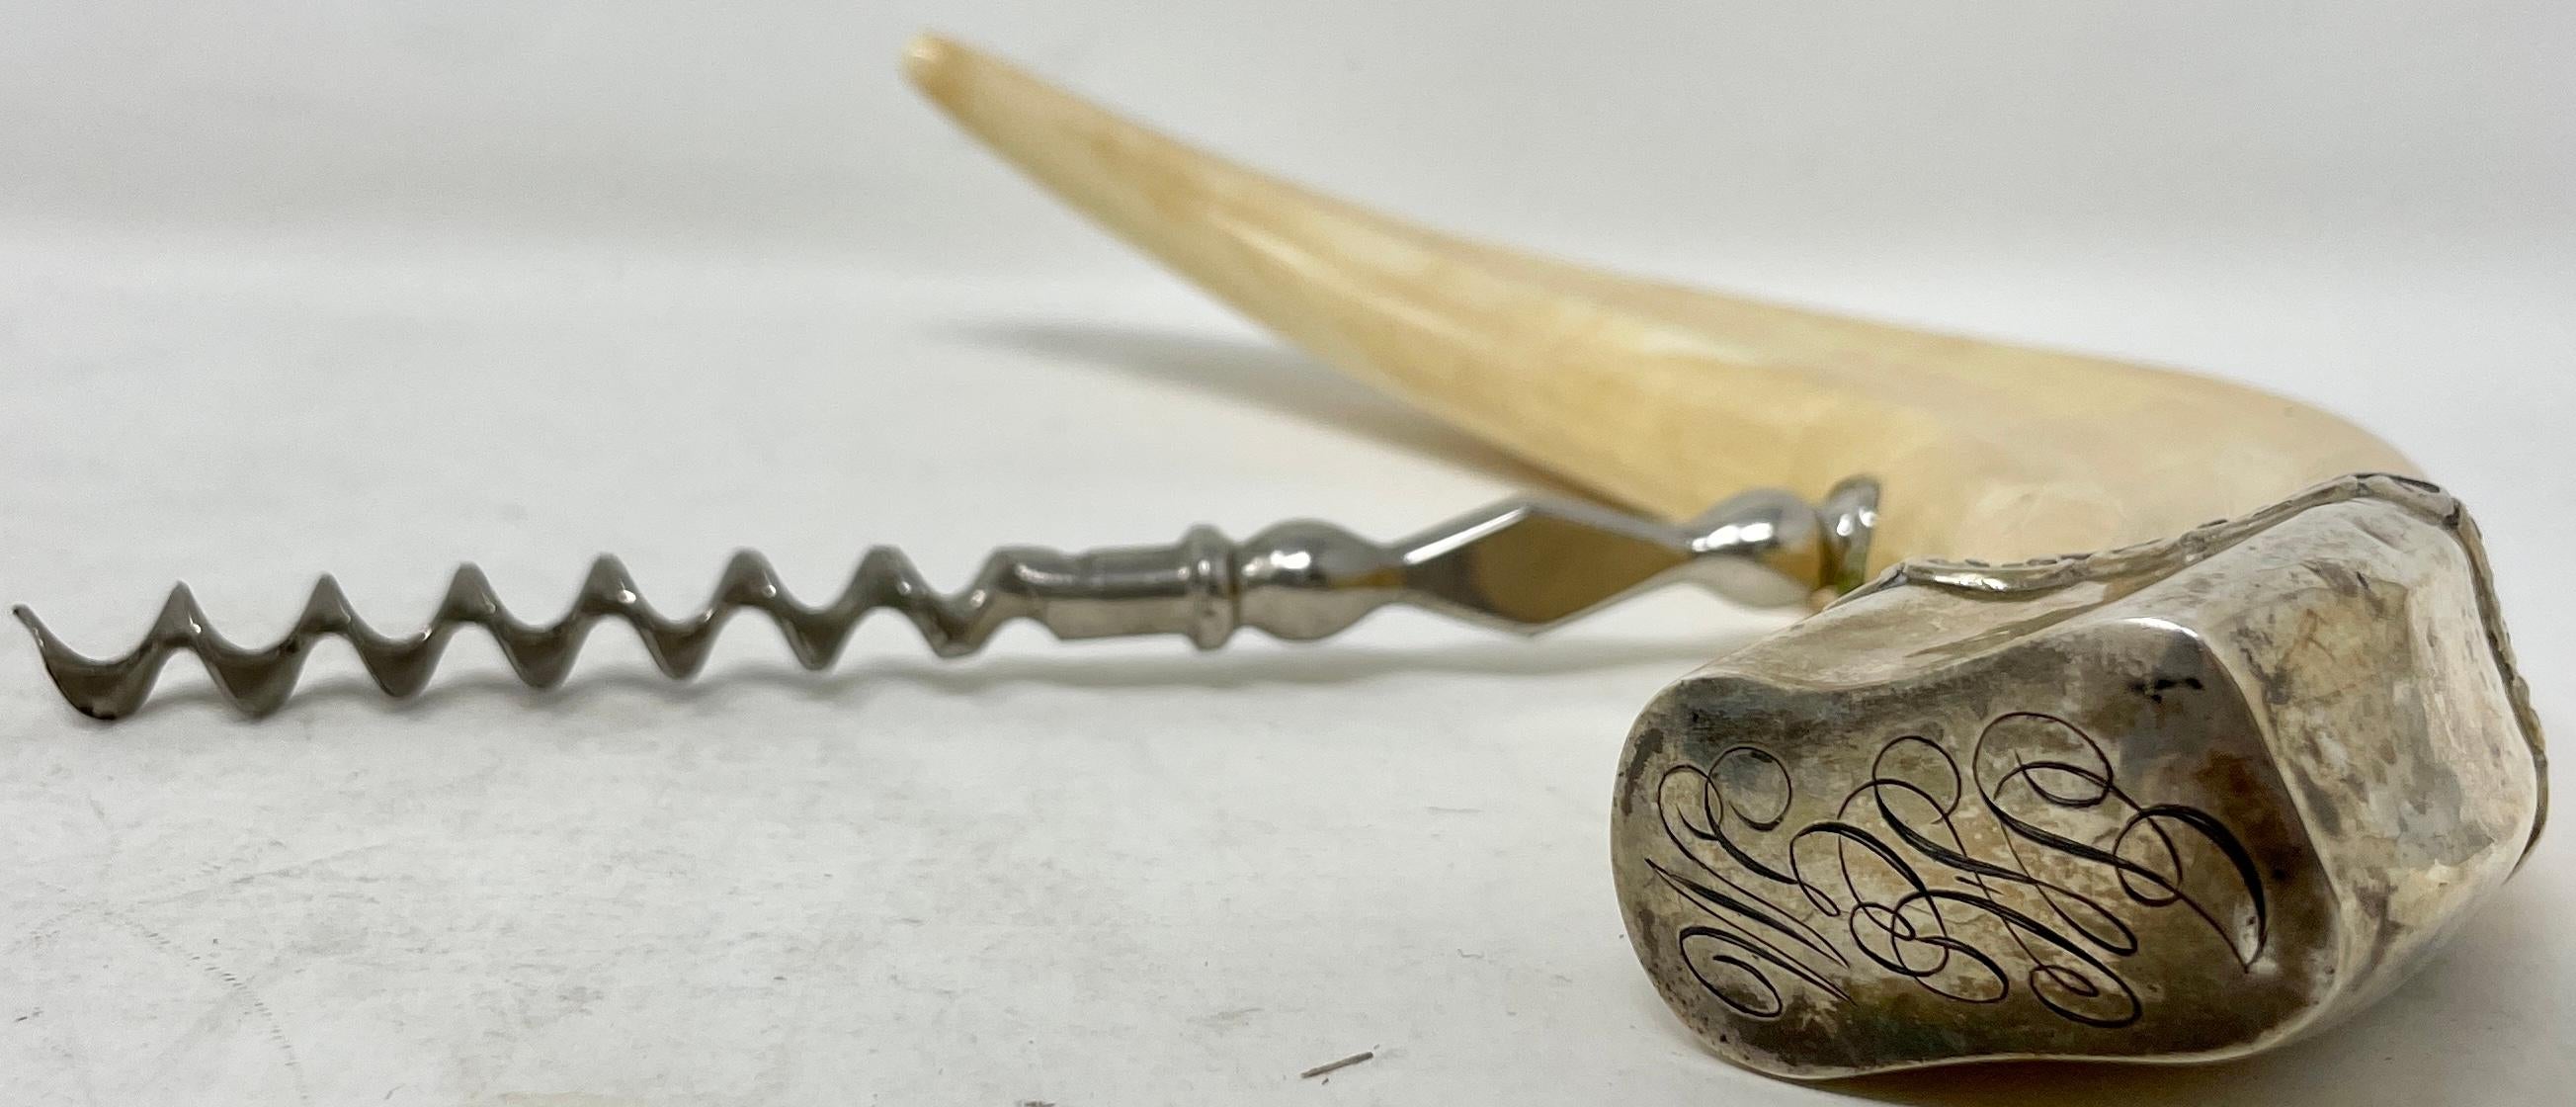 20th Century Antique Sterling Silver Mounted Boar's Tusk Corkscrew with Nickel Silver Worm.